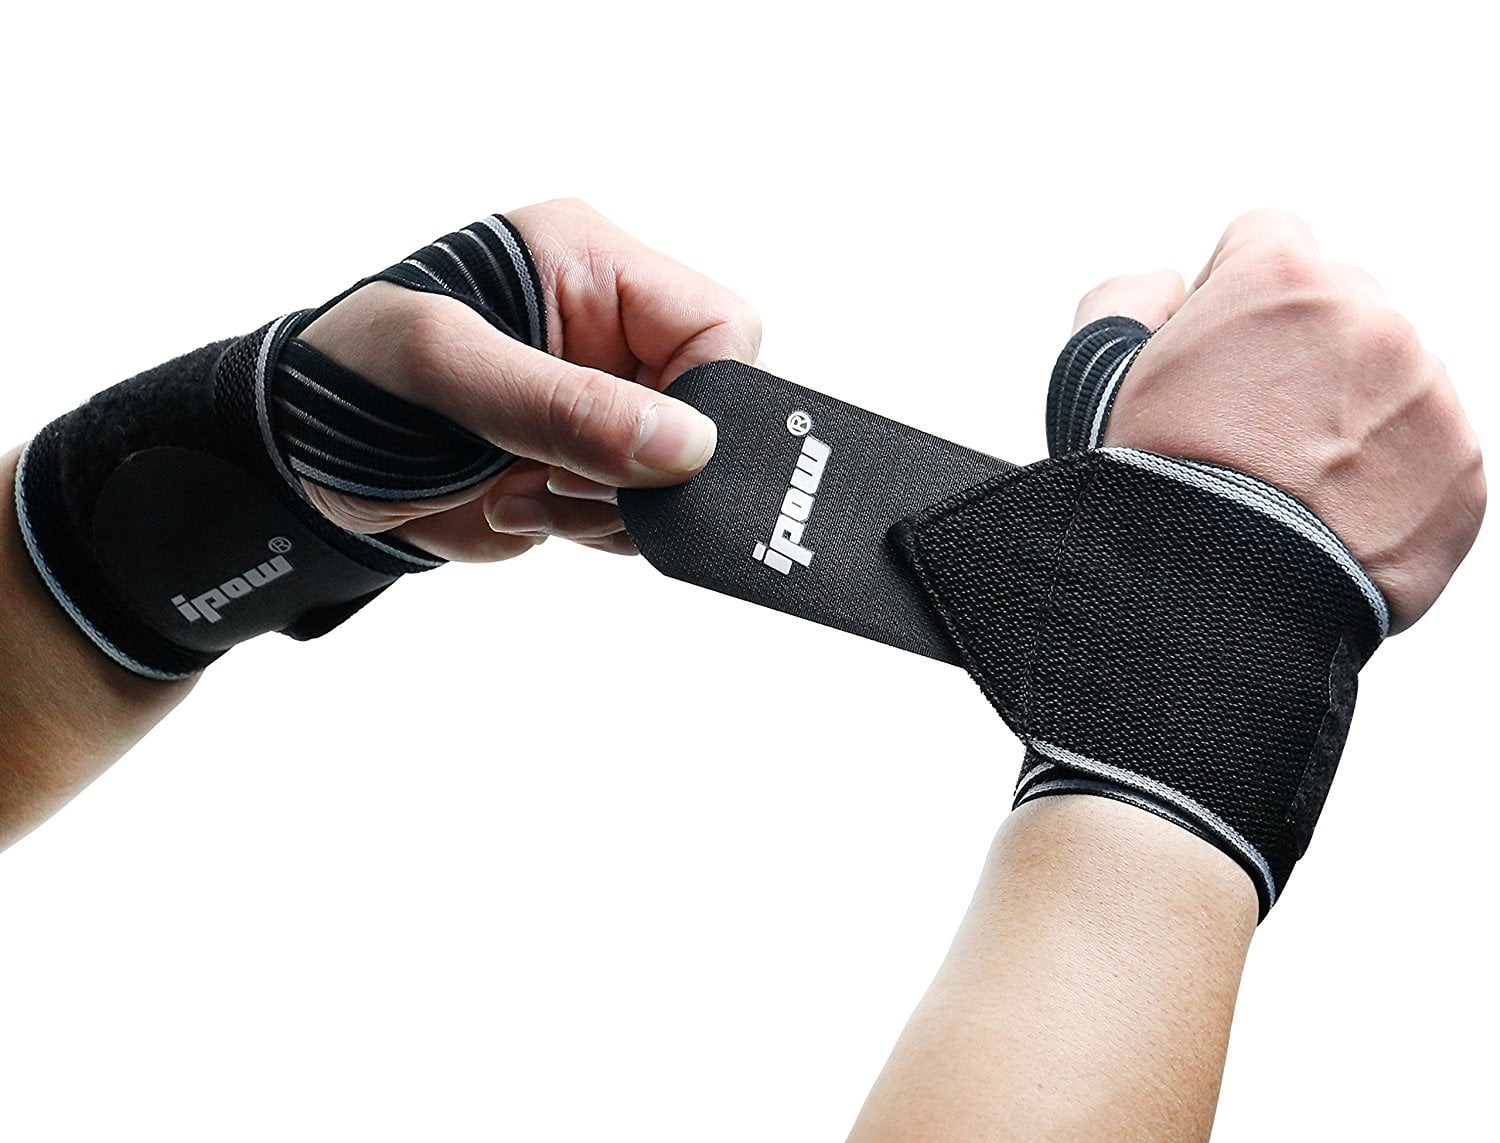 1 Pair Adjustable Wrist Supports Wraps Brace Straps for Weight Lifting Workouts, One Size Fits All ipow